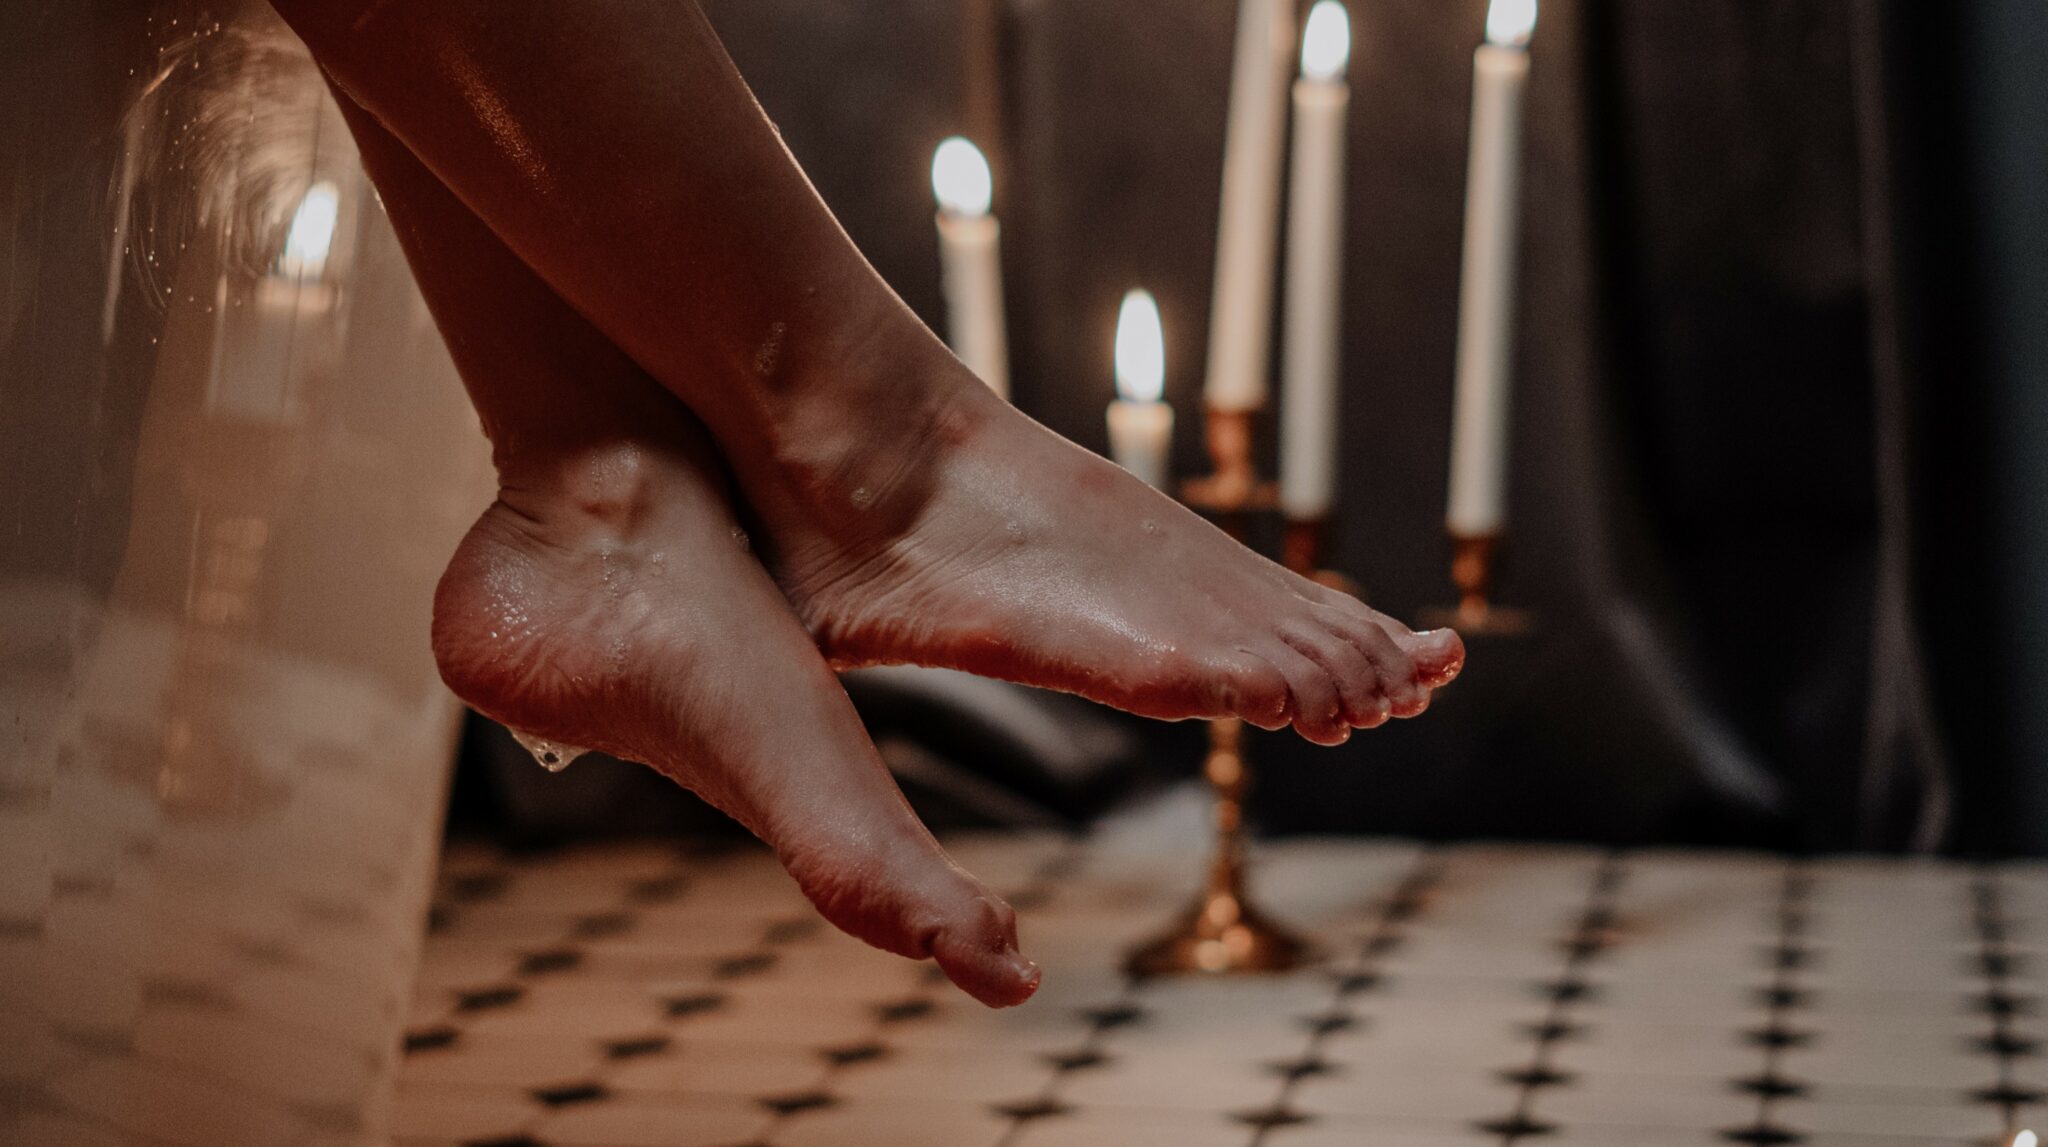 Woman's feet dangling off the side of a bathtub with a lit candelabra in the background.